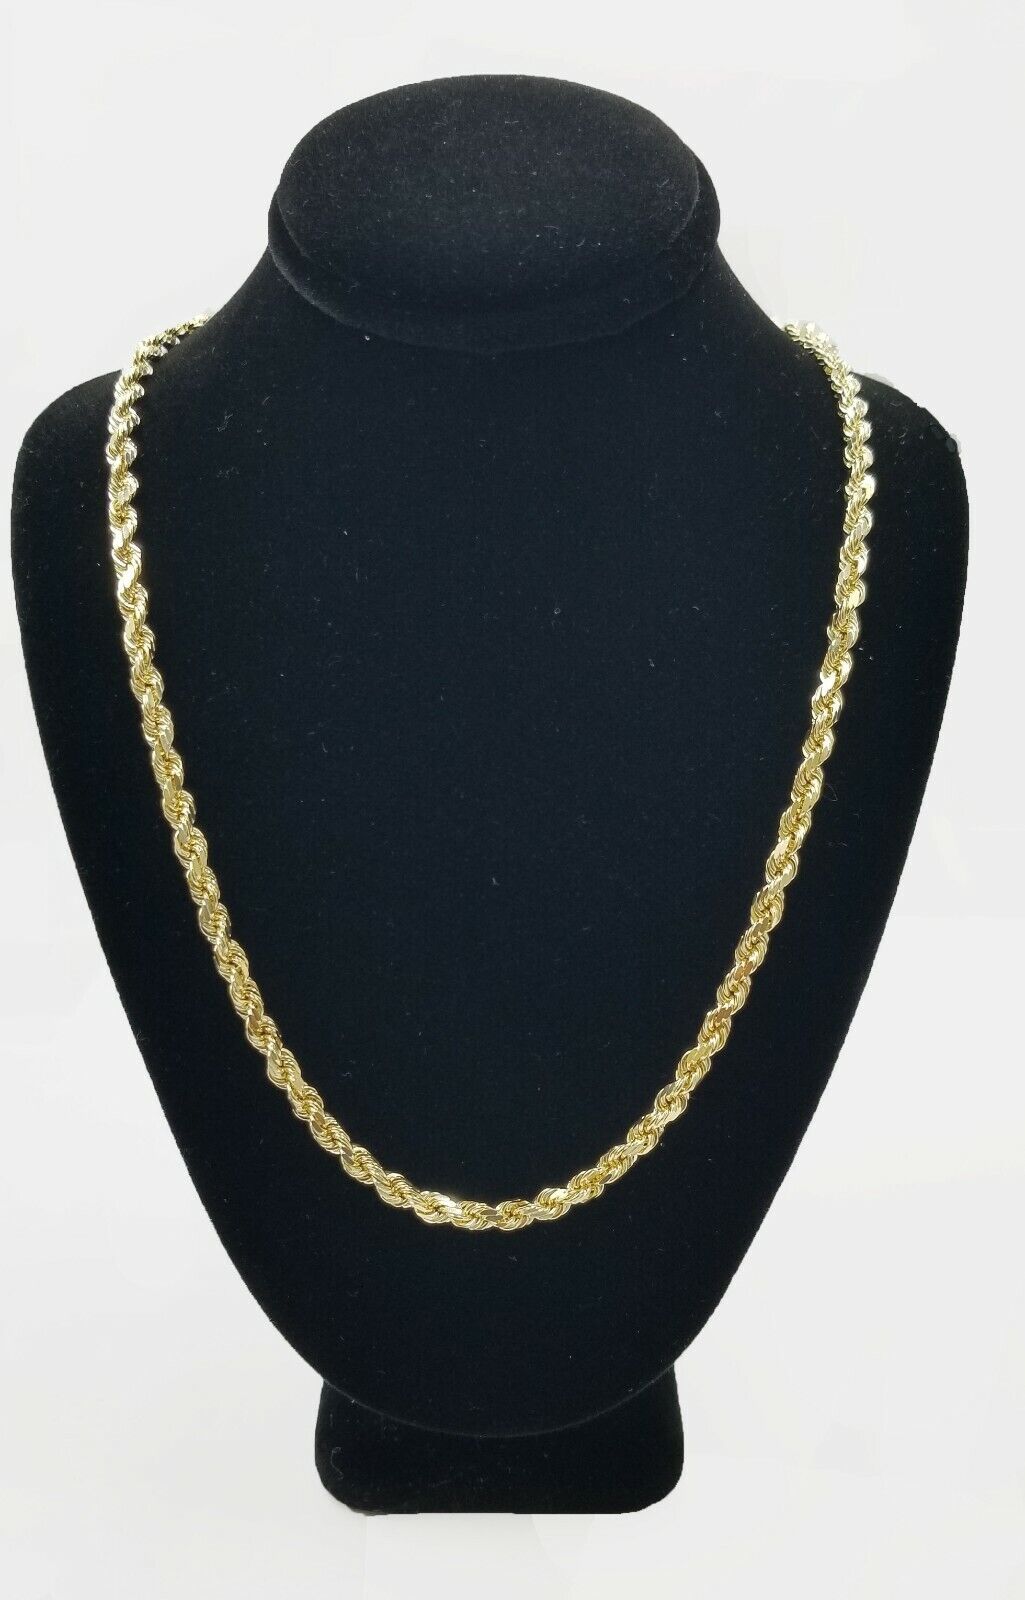 10k Real Gold Rope Chain For Men SOLID Diamond Cut 4mm 20 Inch Free Shipping